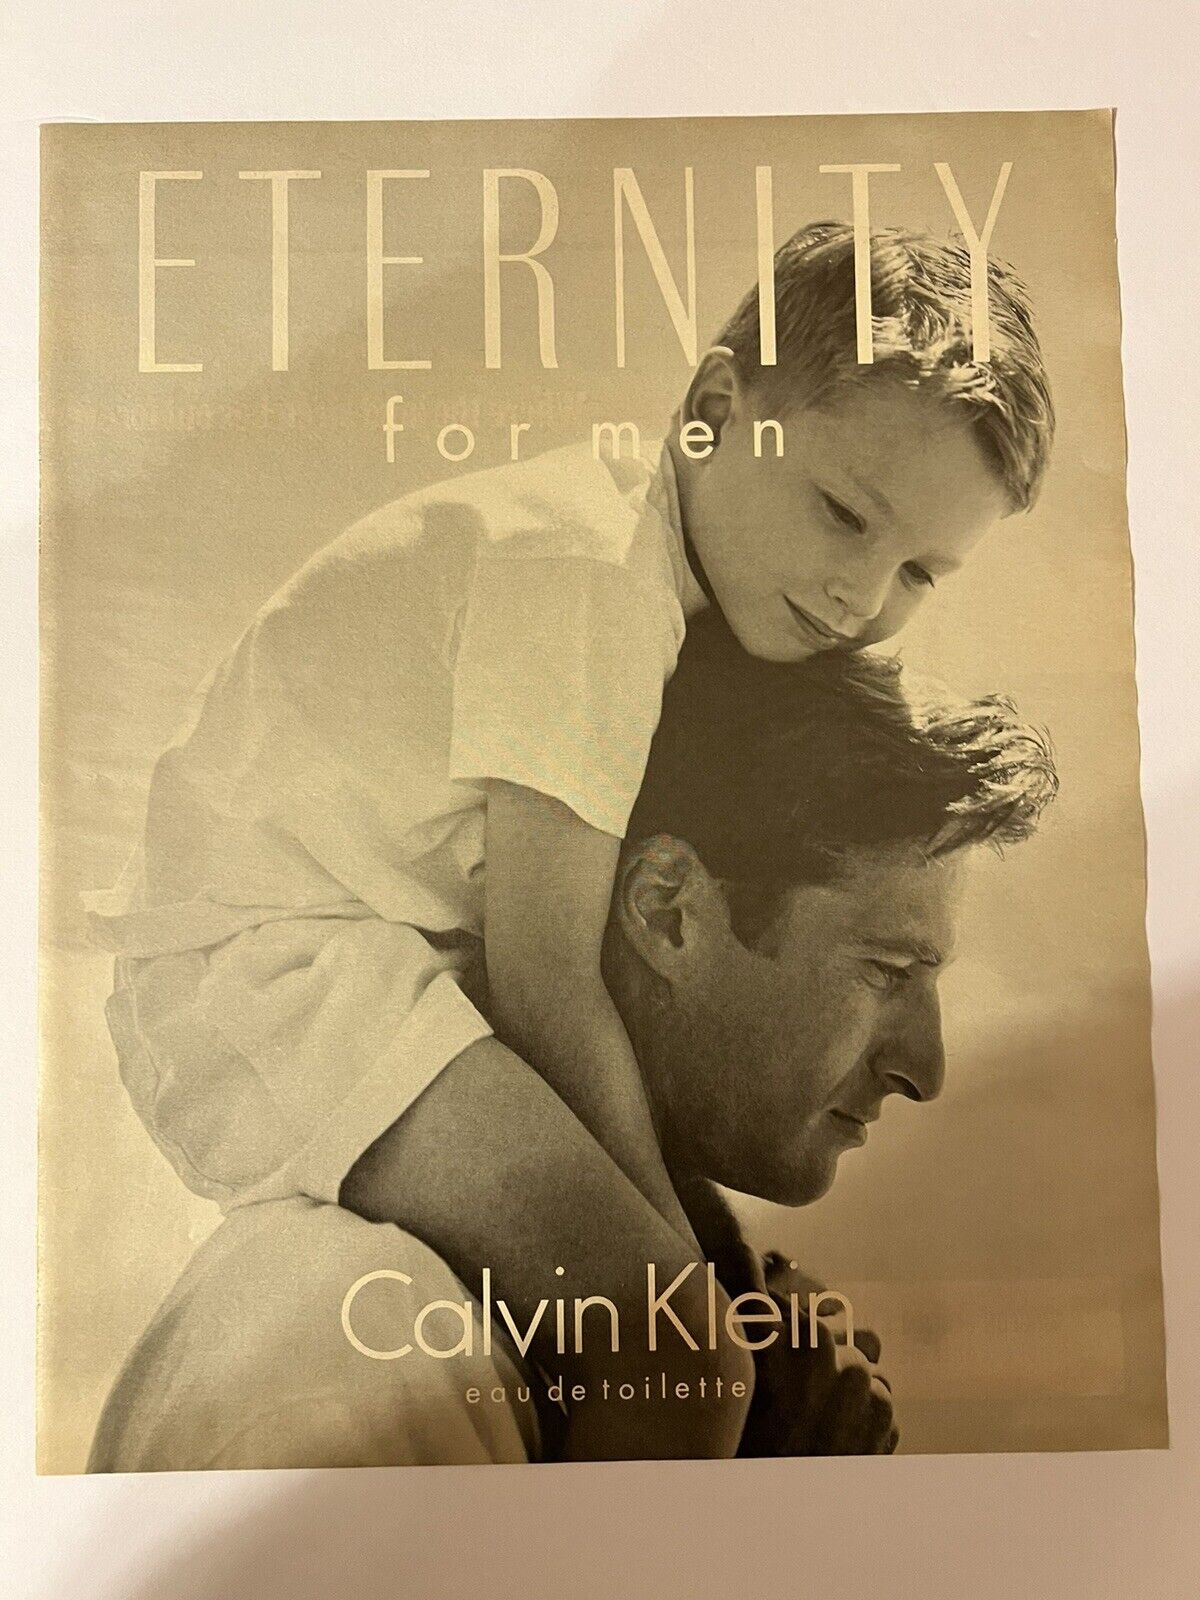 Vtg 1990s Calvin Klein Eternity for Men Muted Black and White Father with Son